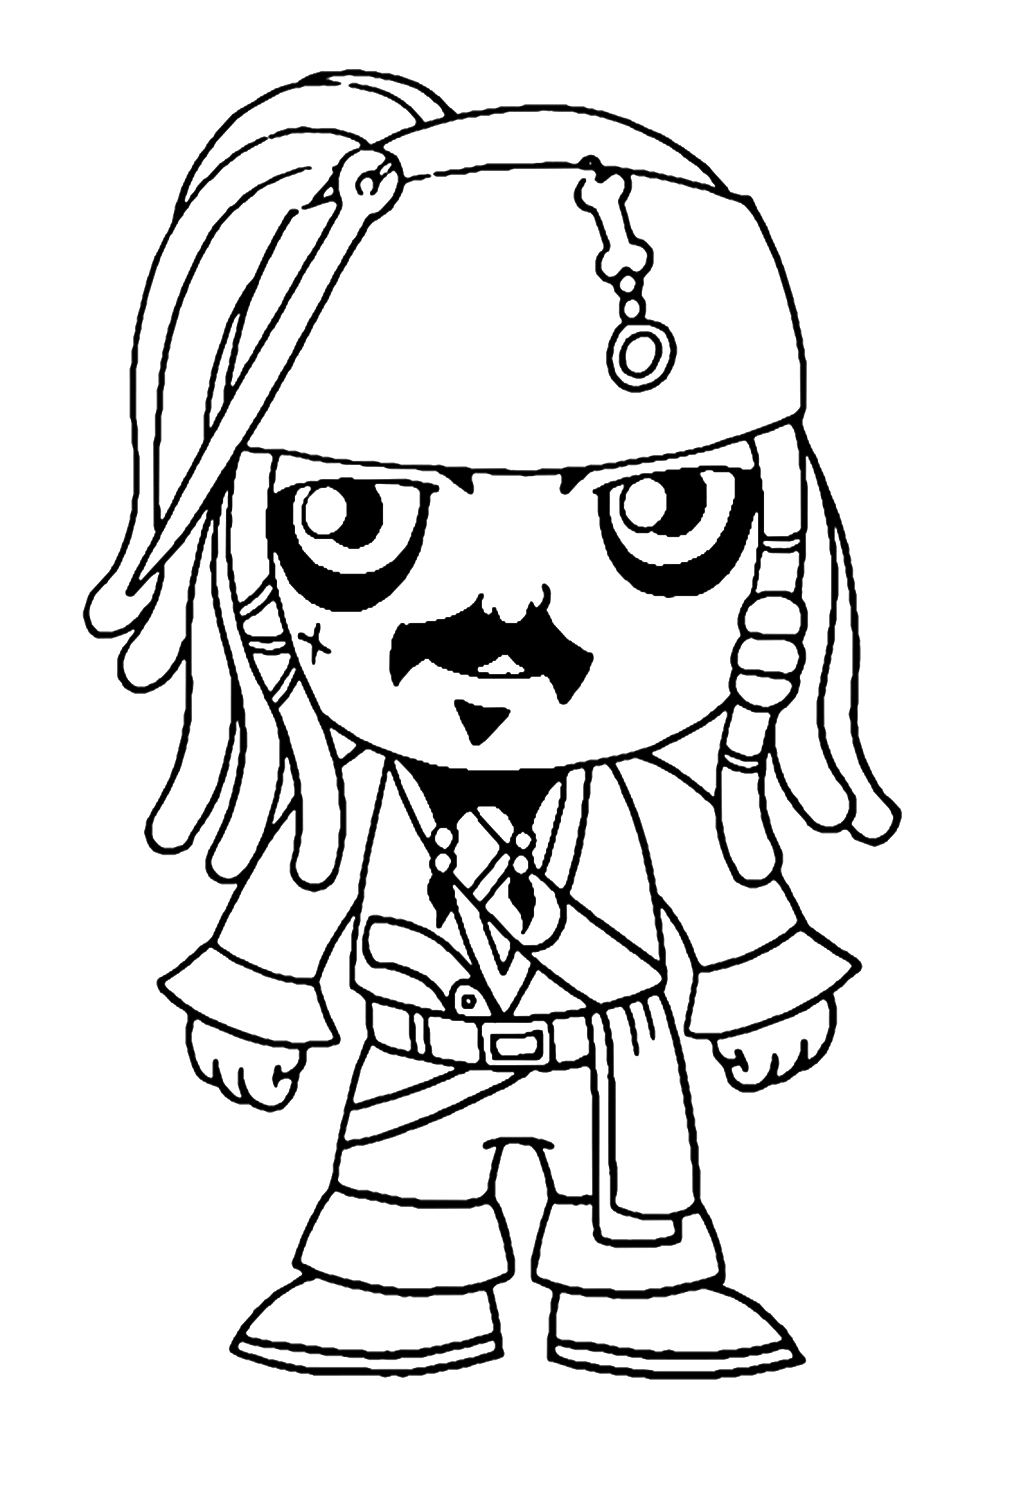 Jack Sparrow Coloring Pages